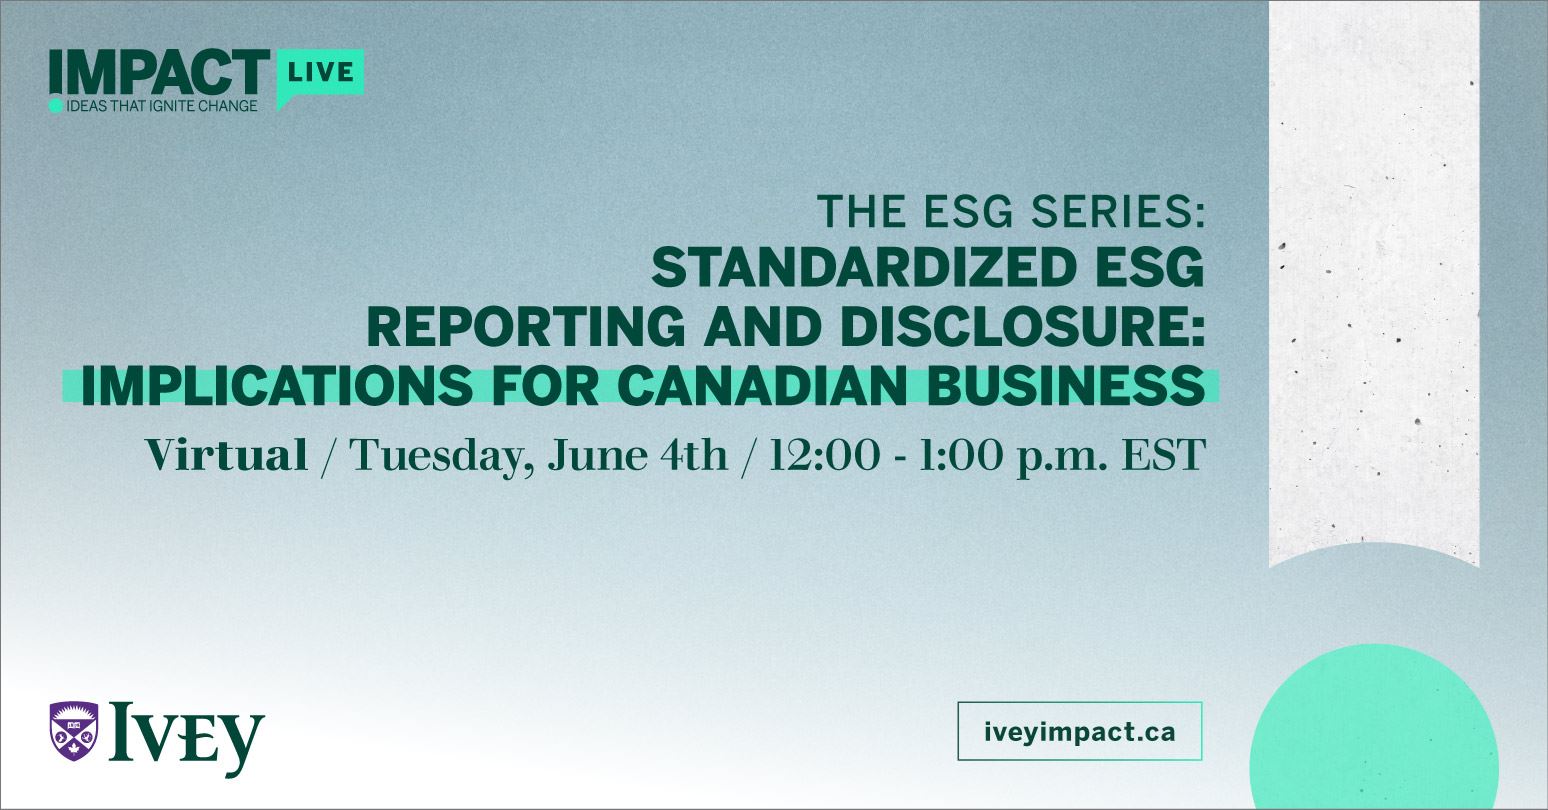 The ESG Series: Standardized ESG Reporting and Disclosure: Implications for Canadian Business